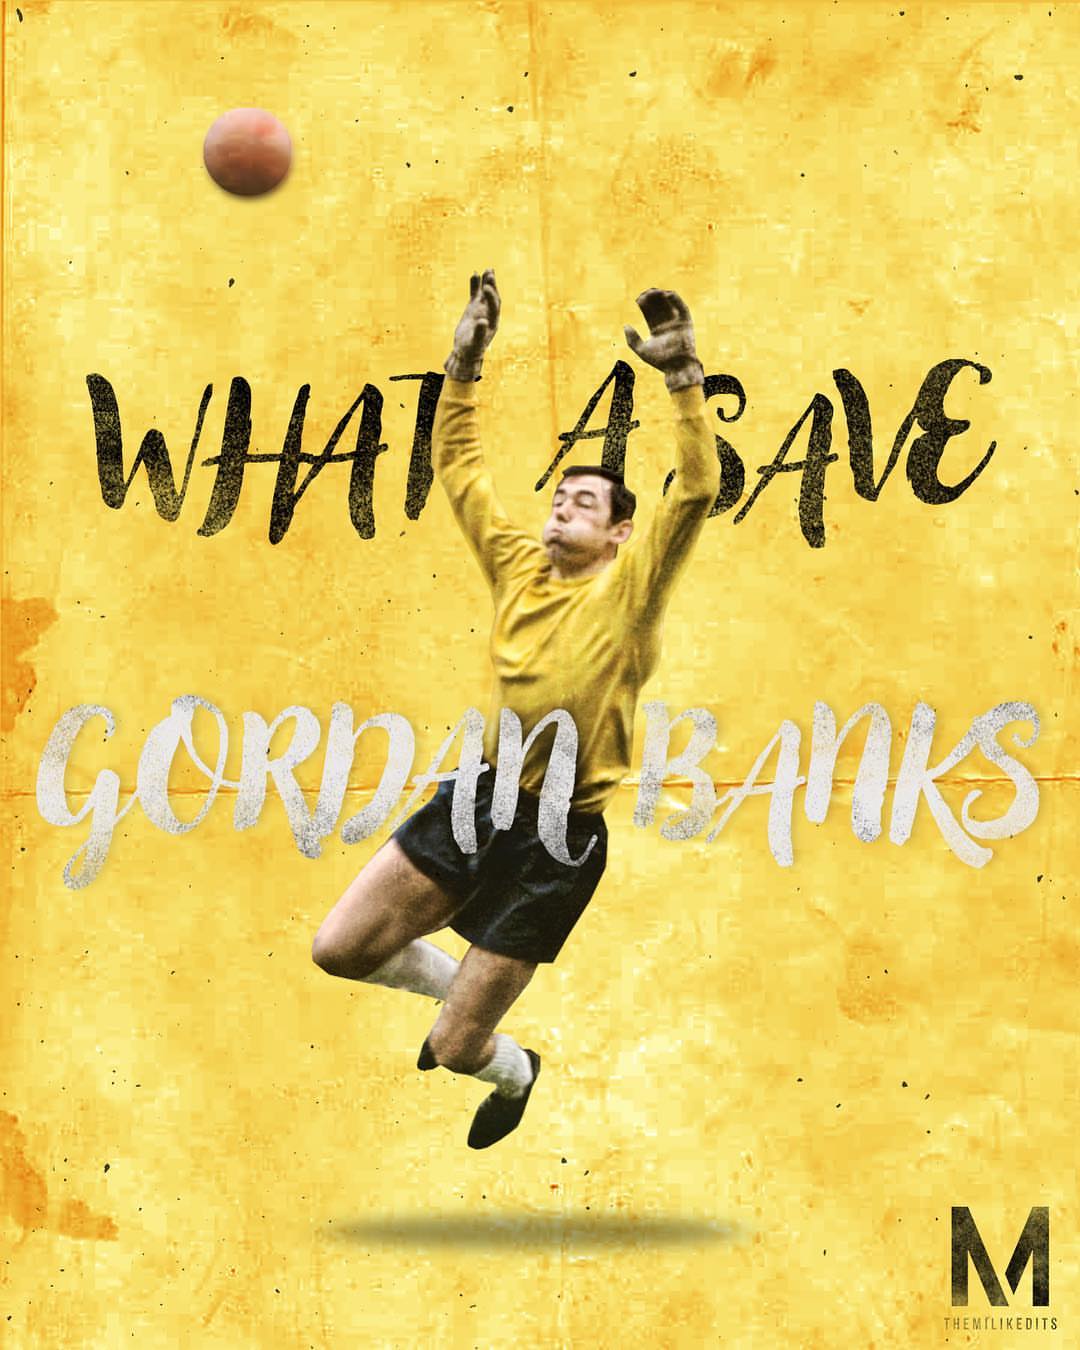 Gordon Banks Wallpaper. RIP Legend This post was inspired